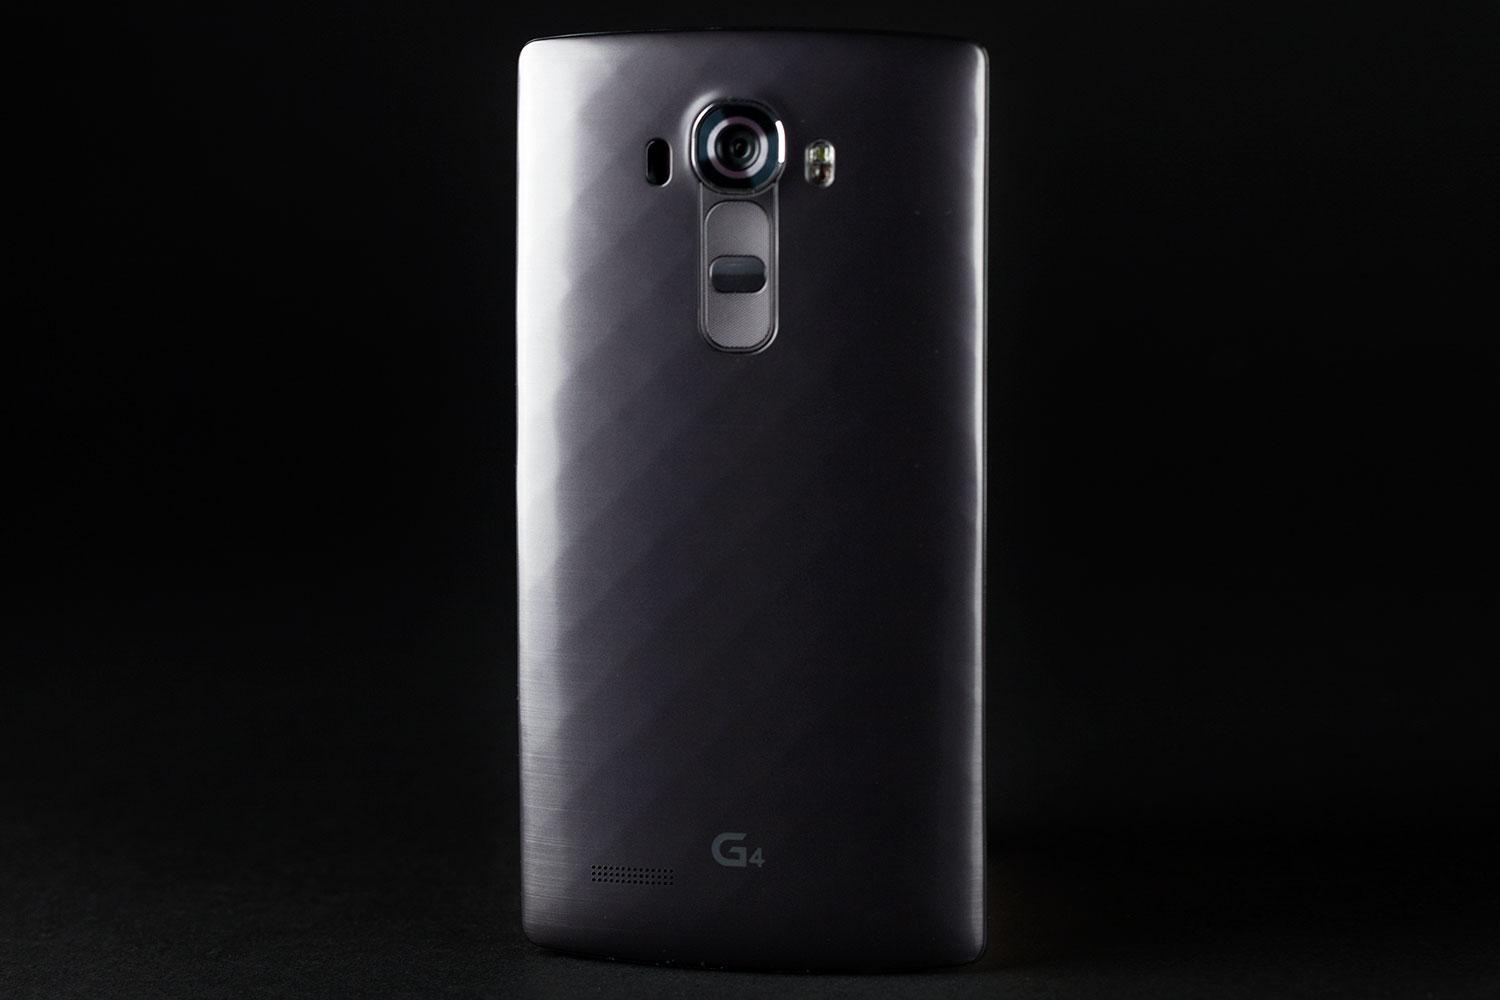 Up close and personal with the LG G4